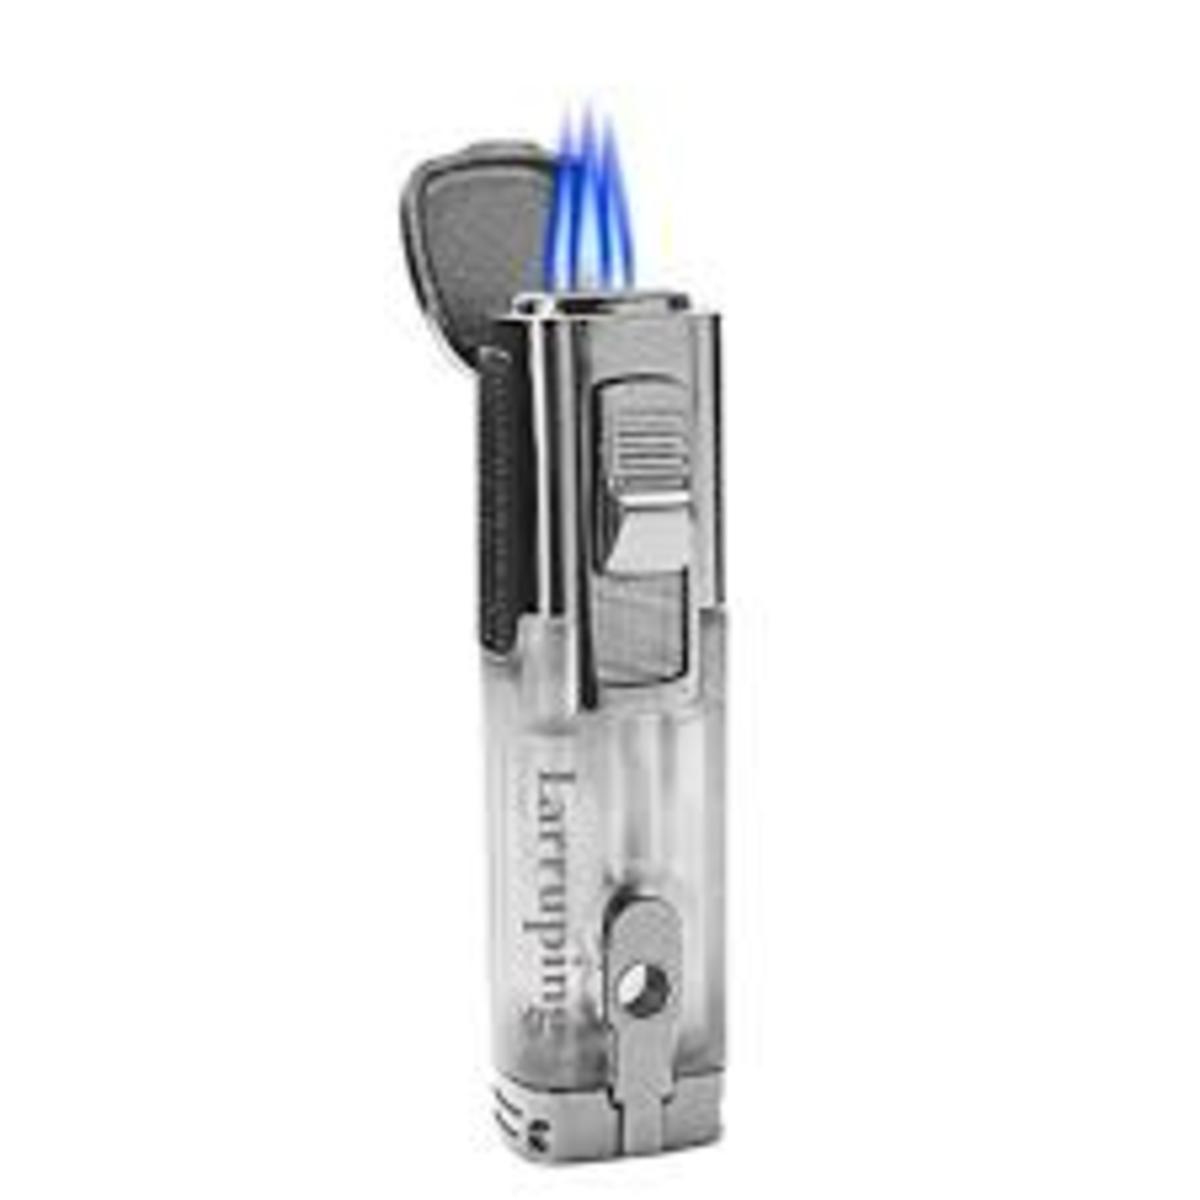 the ultimate lighter reviews which lighter is best suited for your needs